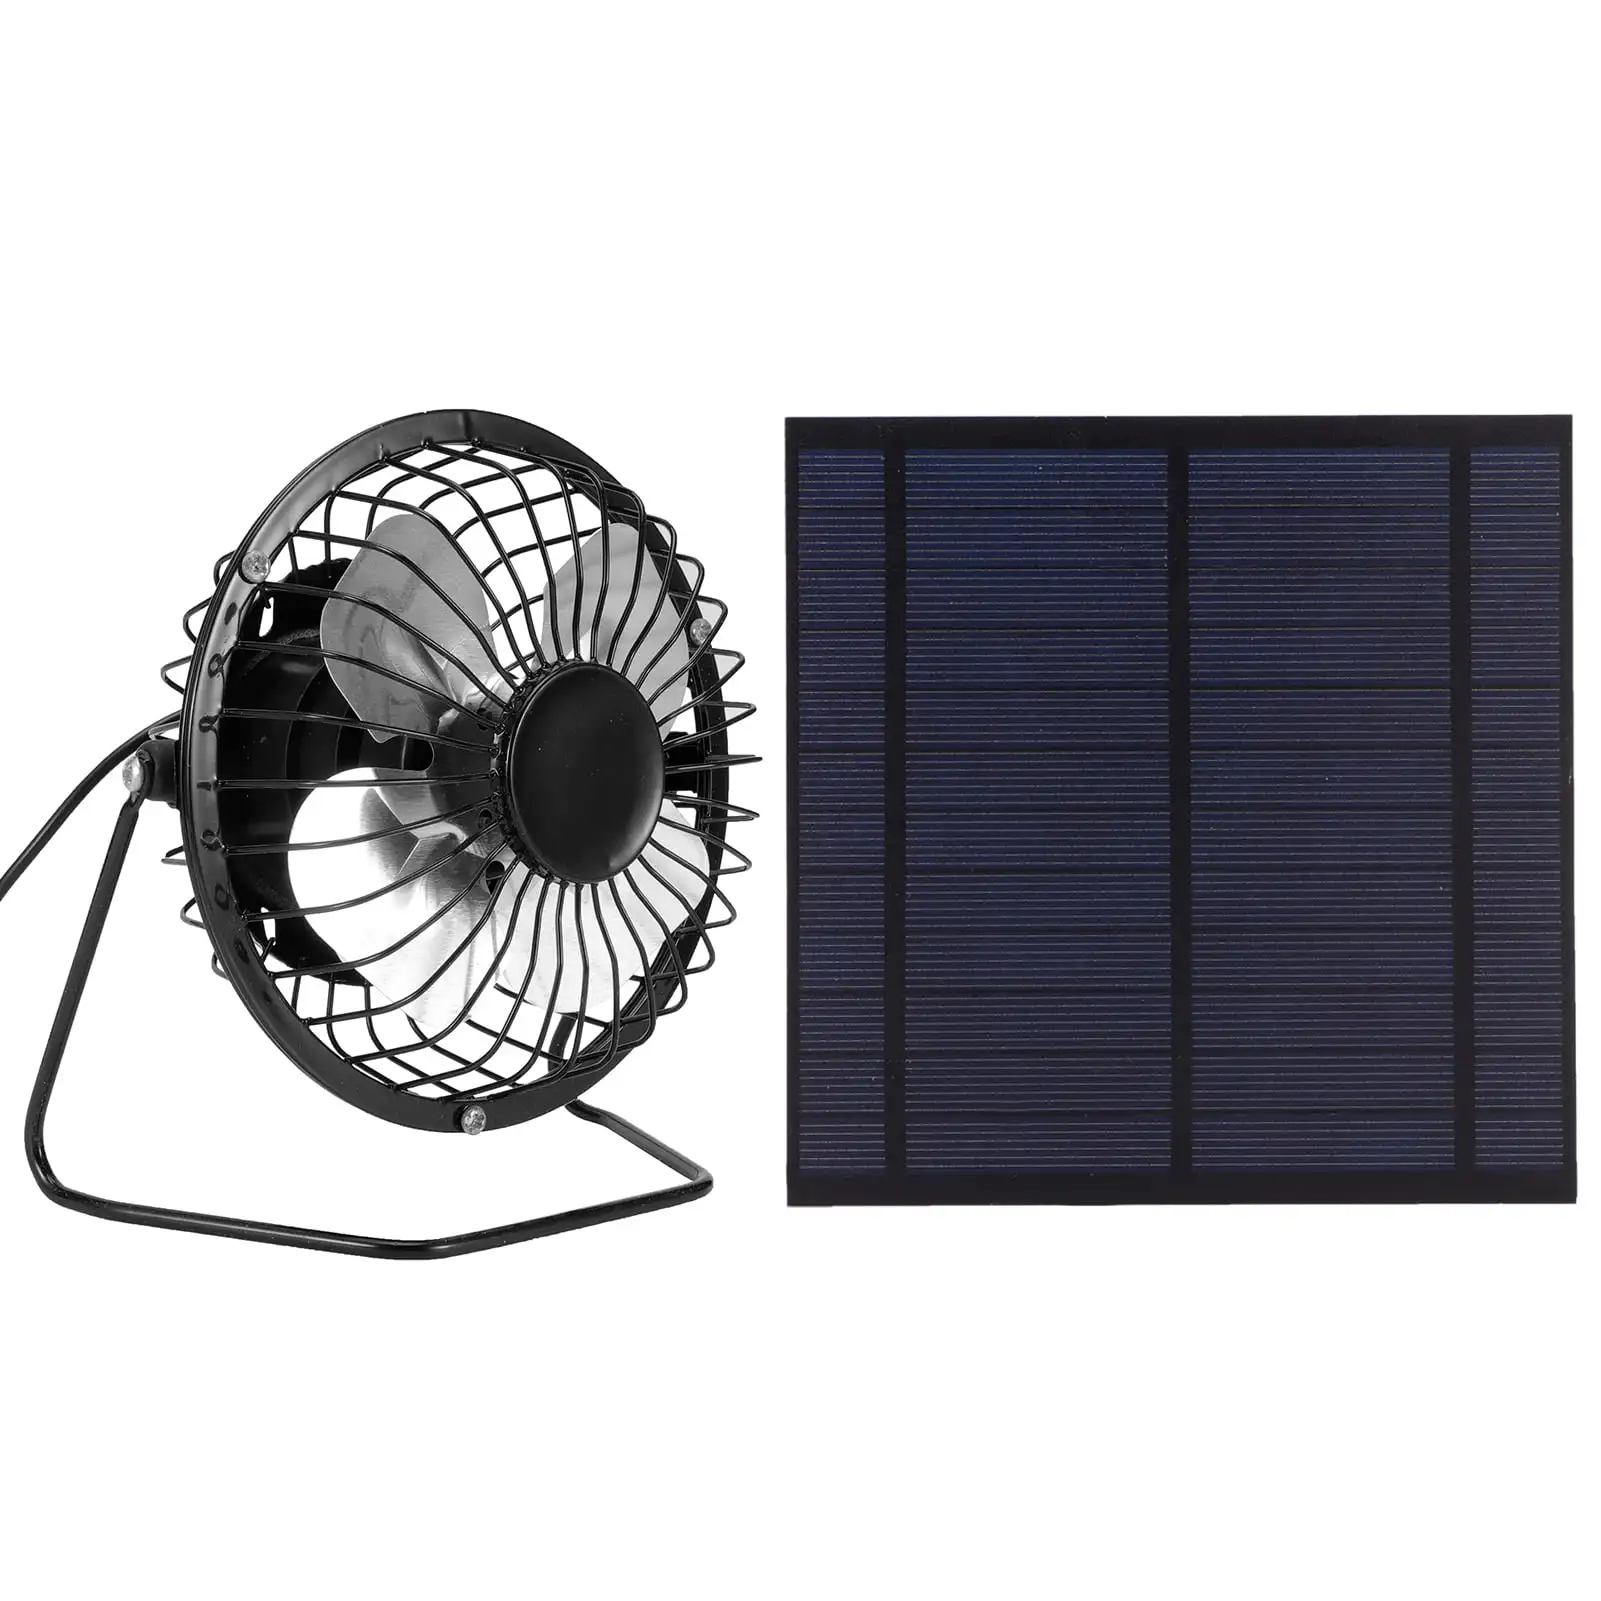 Solar Panel Cooling Fan, 5W Mini Iron Super Silent High Efficiency Output Solar Panel Powered Fan, For Greenhouses Dog House